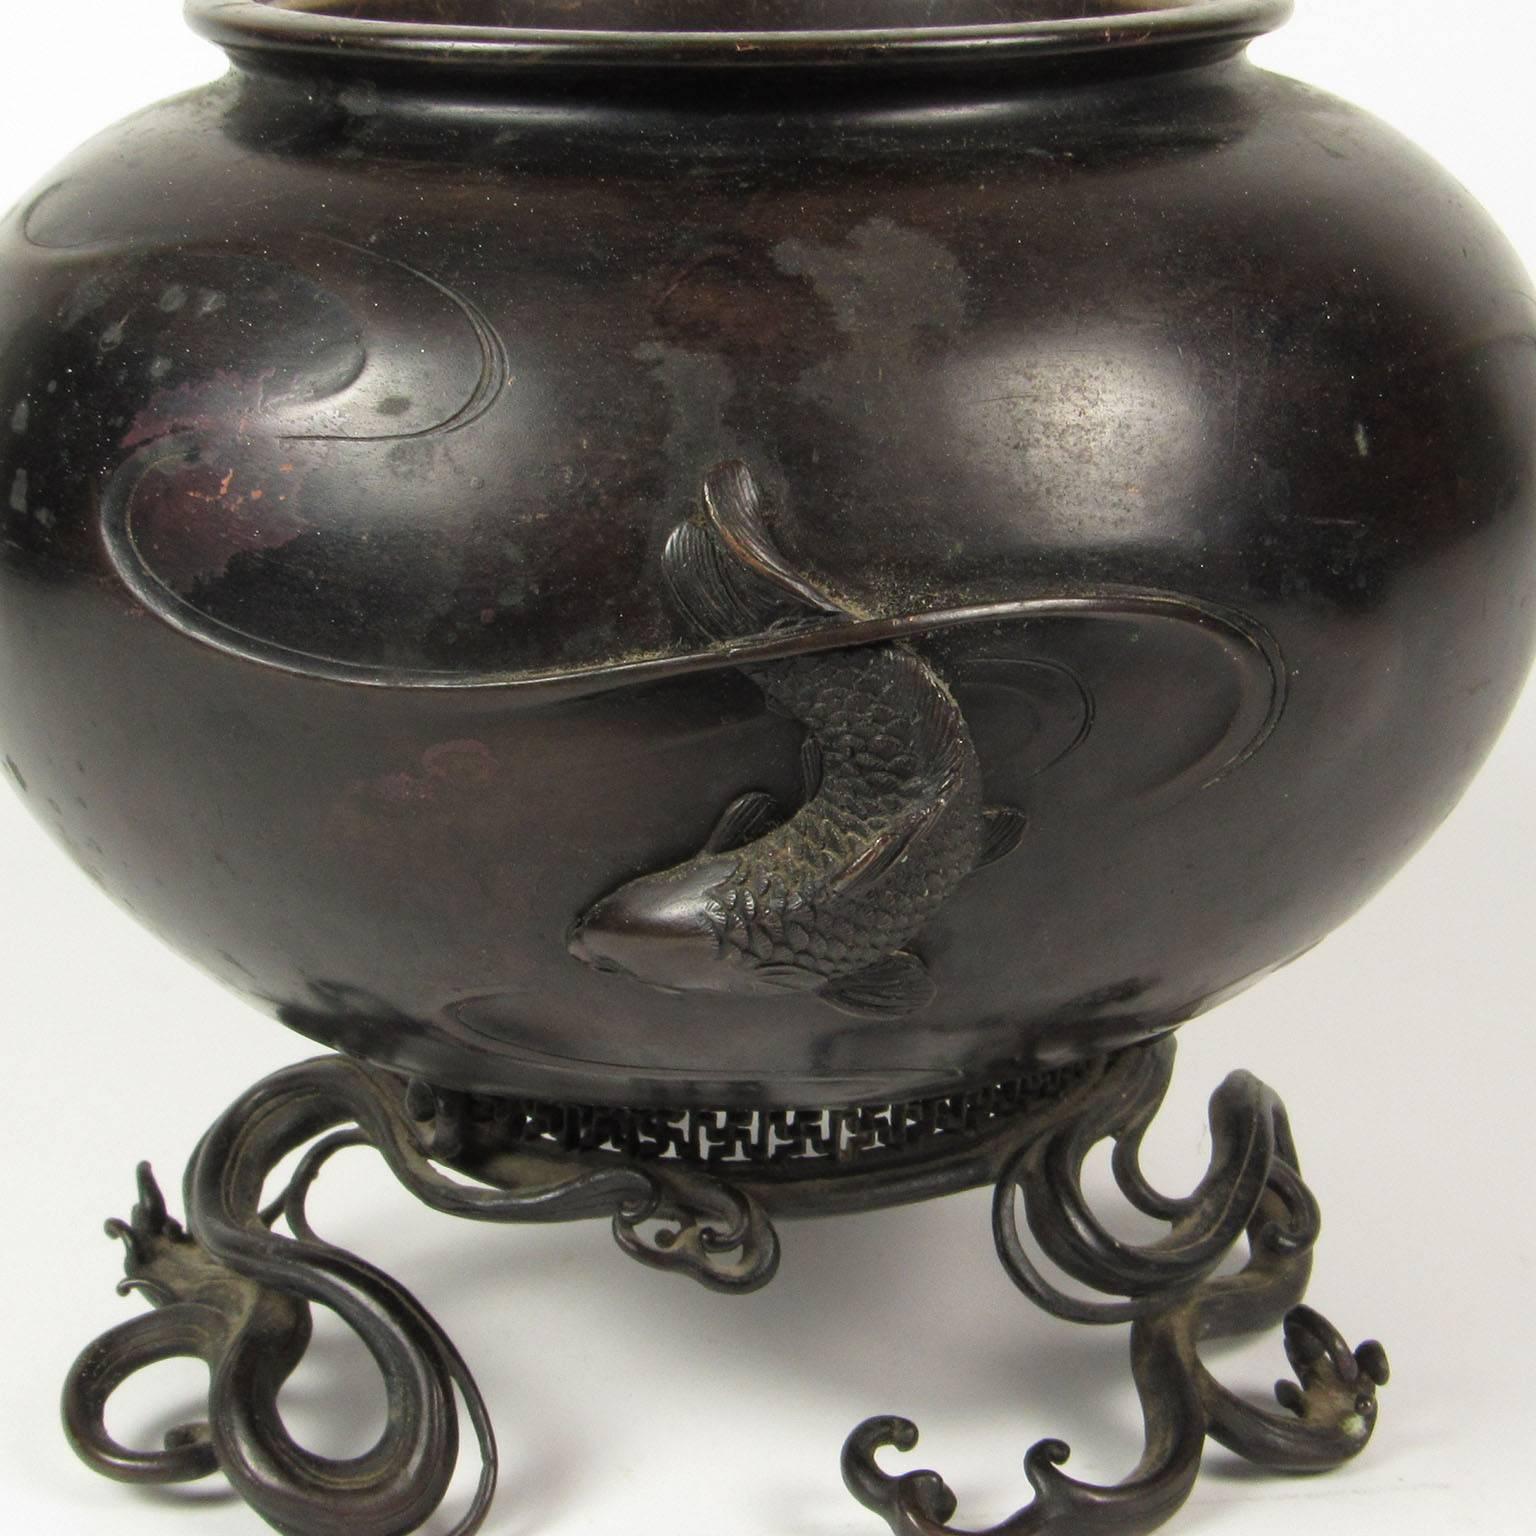 Meiji or Edo period Japanese bronze footed censor with Koi decoration and cloud band feet. Exceptional quality. Maker’s mark on bottom. Measures: Height: 6 1/2 inches, diameter: 8 inches. Provenance available to buyer.